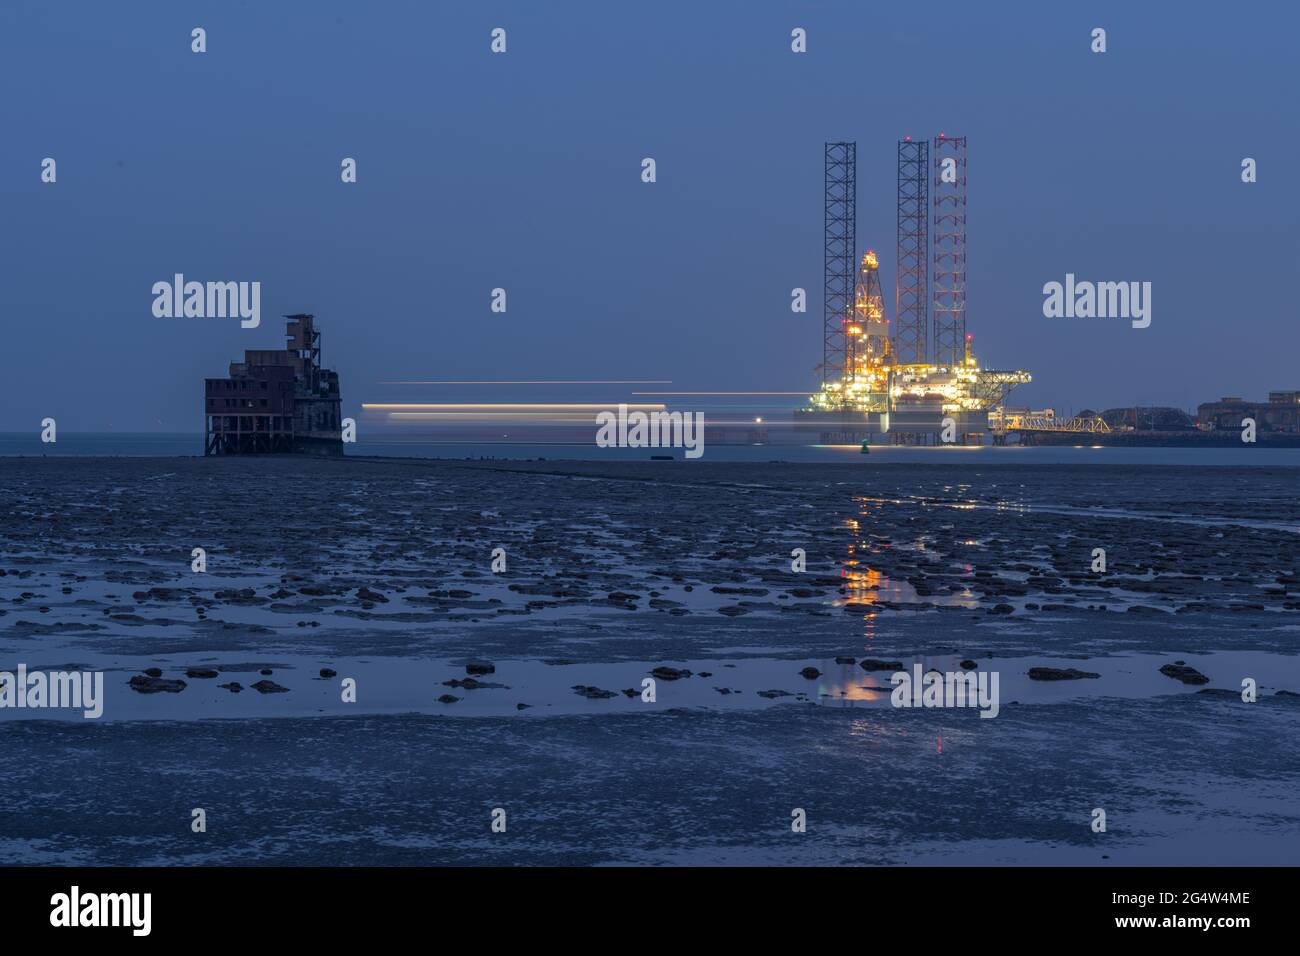 Blurred lights of a Ship moving behind  Grain fort in the Swale with drilling rig moored at Sheerness in the background taken at night. Stock Photo